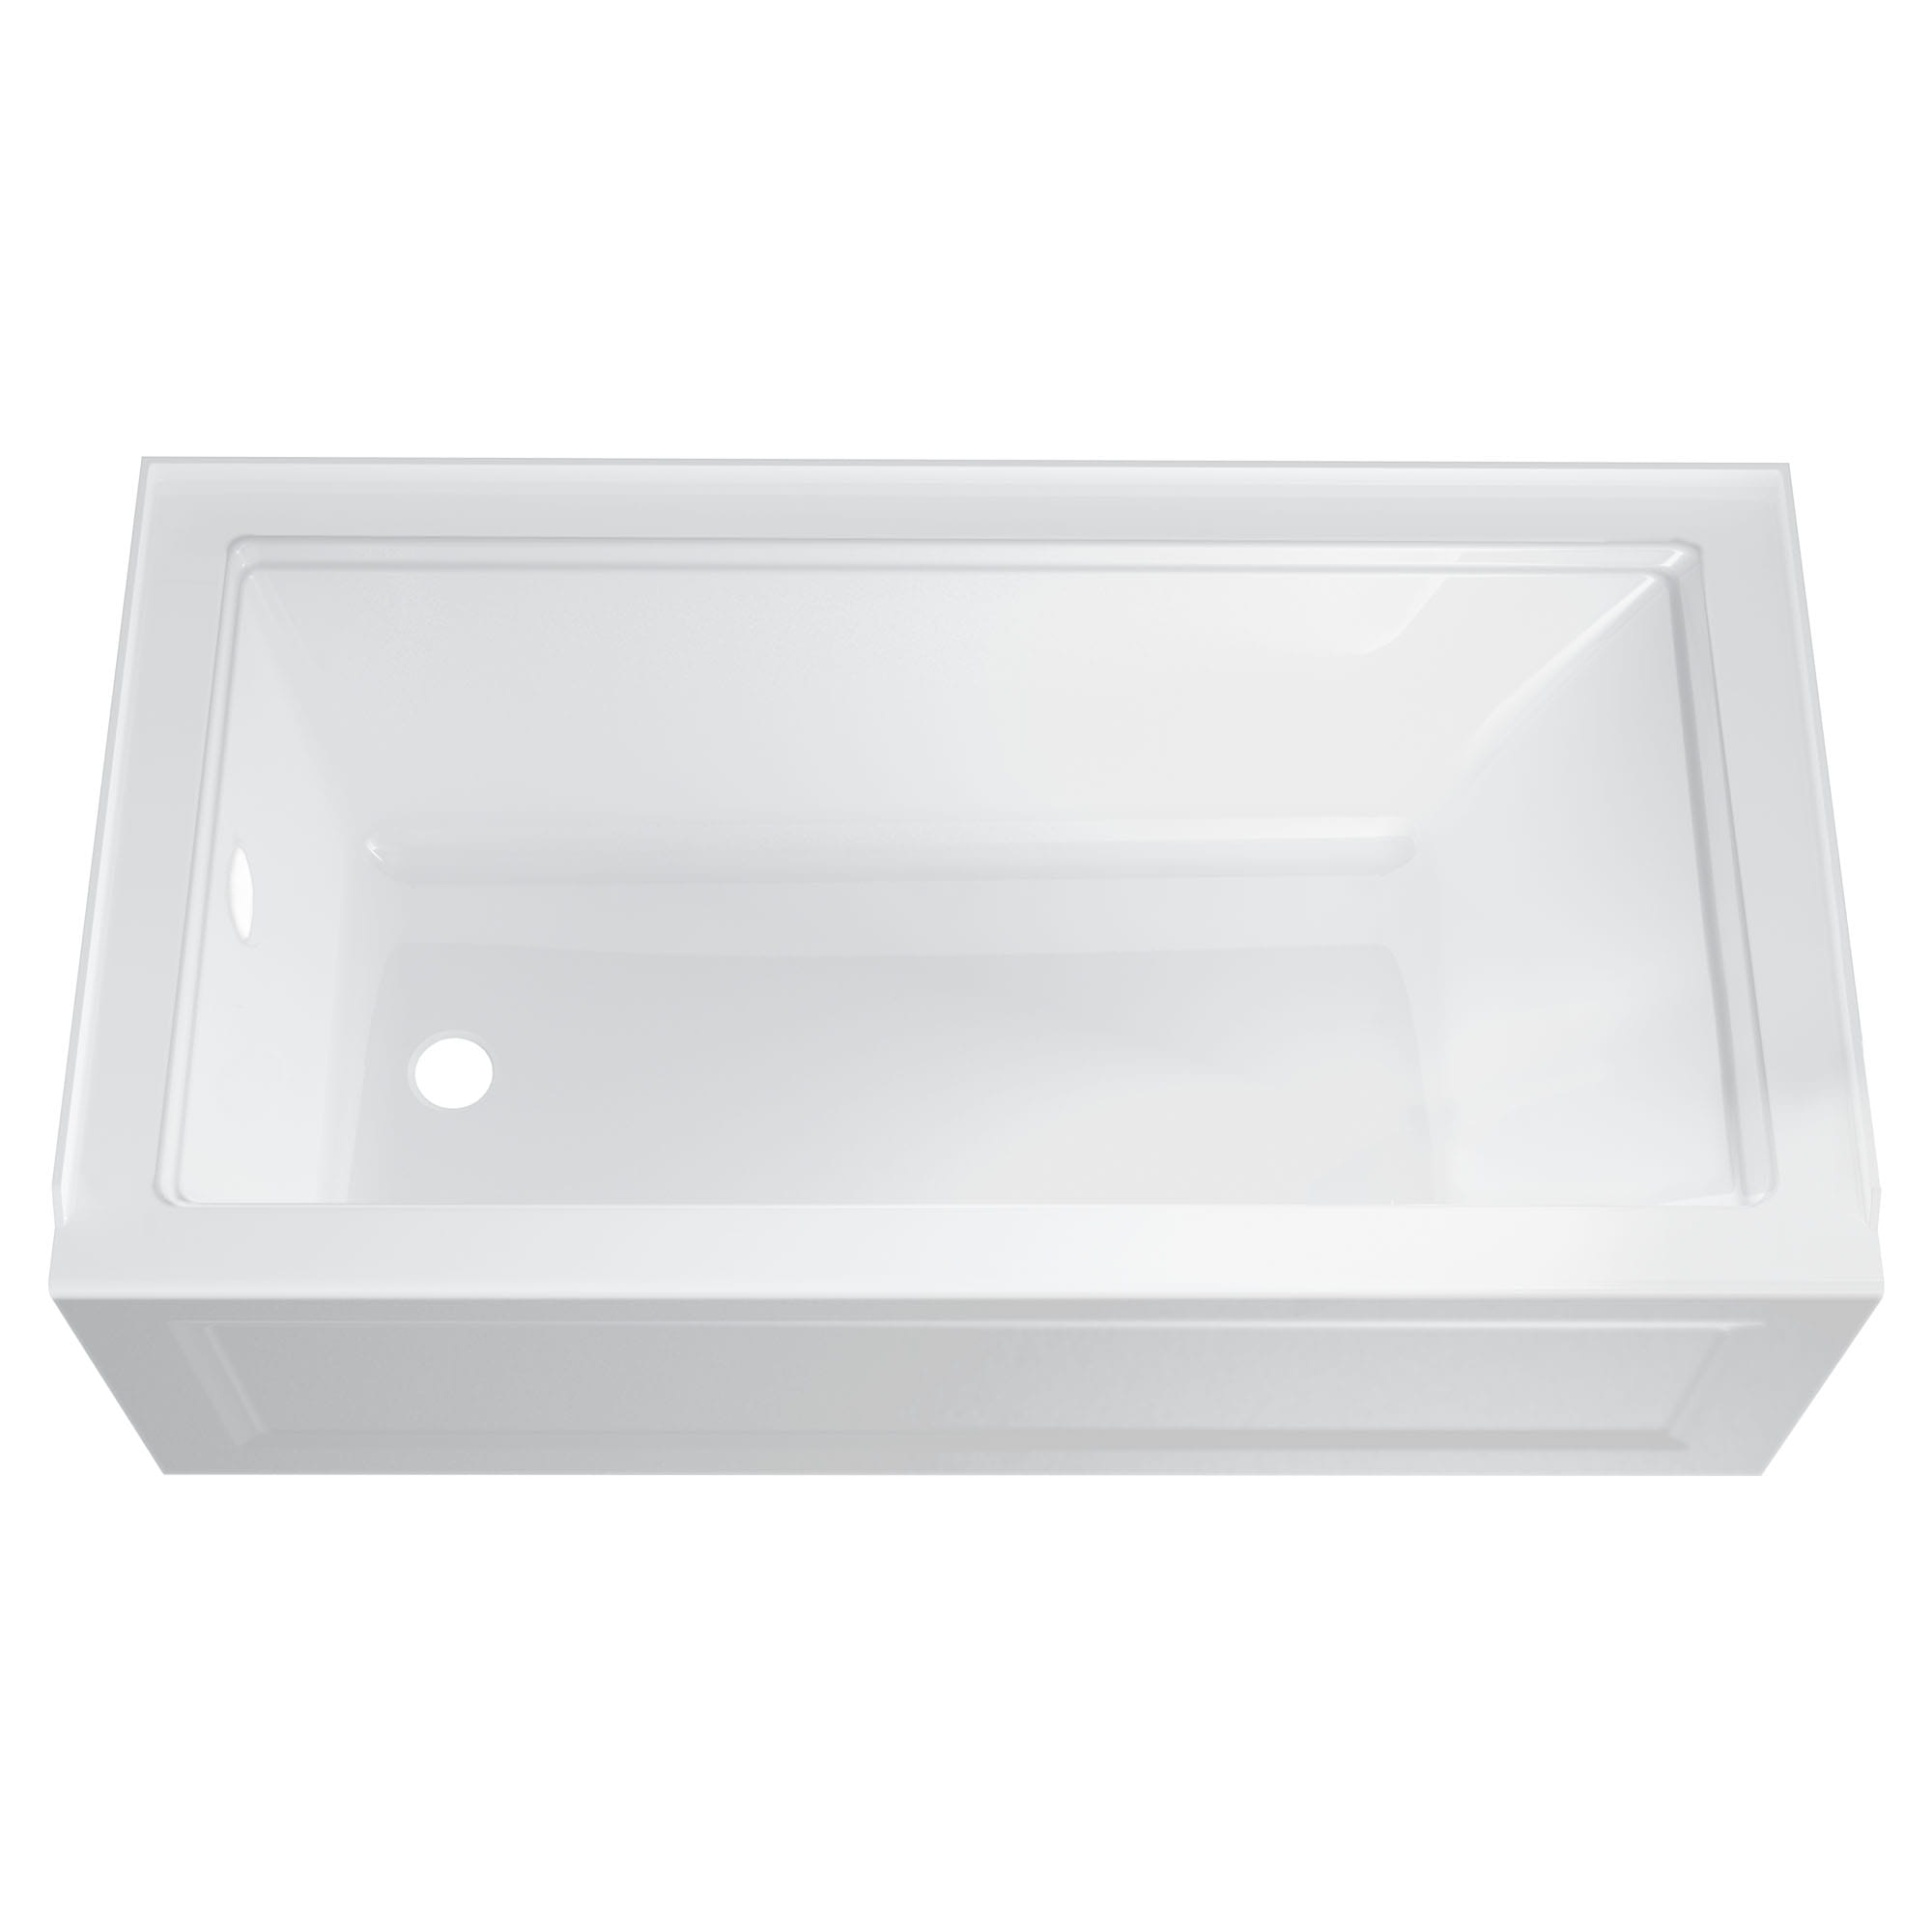 Town Square S 60 x 32 Inch Integral Apron Bathtub With Left Hand Outlet WHITE